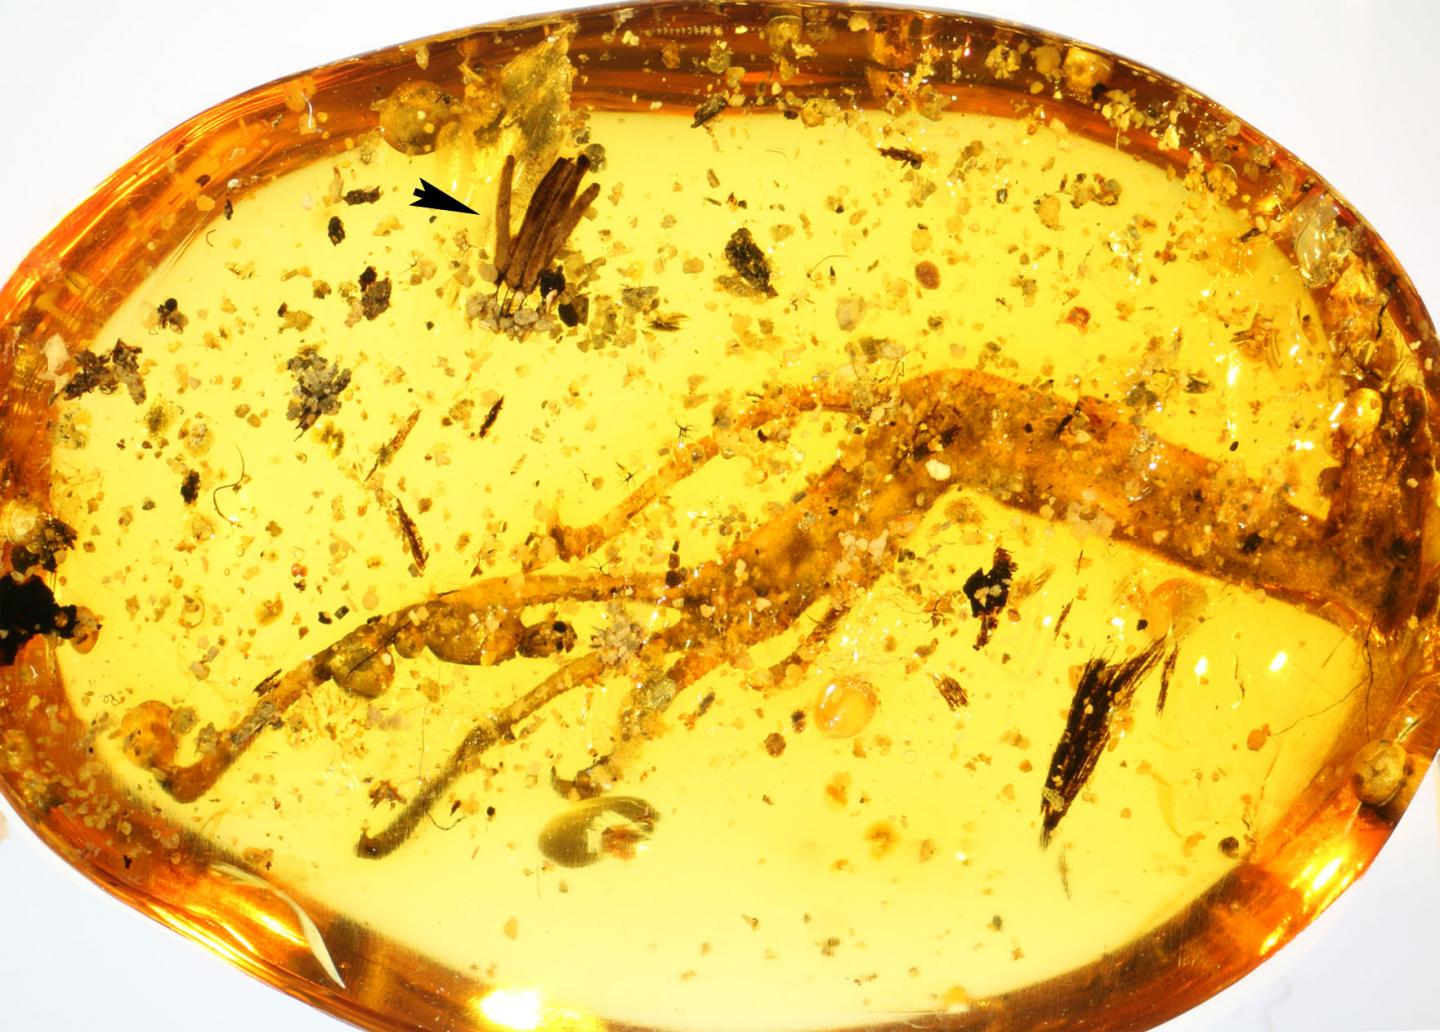 RESEARCHERS DISCOVER 35 MILLION YEAR OLD INSECT TRAPPED IN AN AMBER